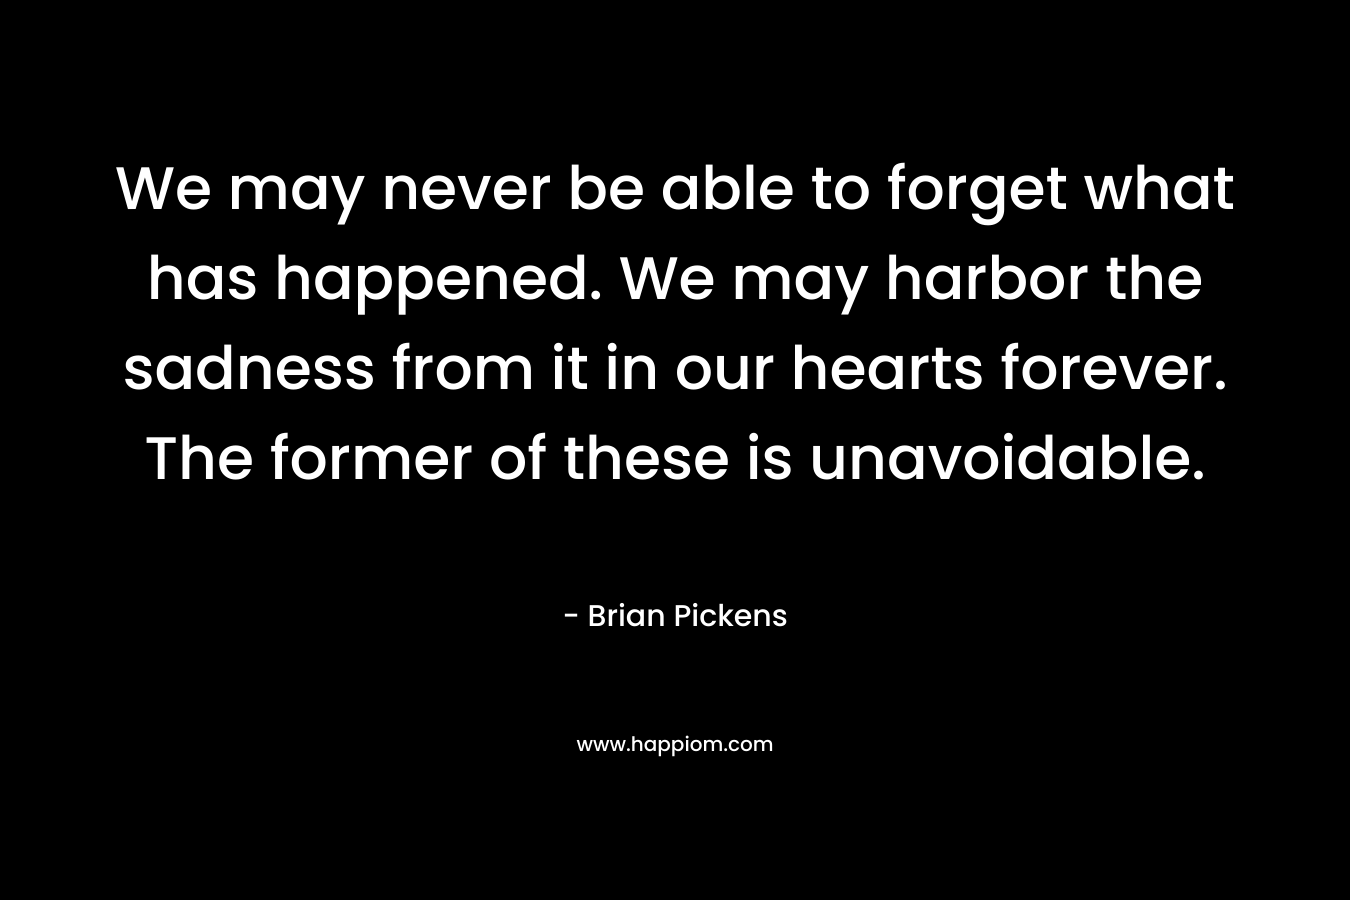 We may never be able to forget what has happened. We may harbor the sadness from it in our hearts forever. The former of these is unavoidable. – Brian Pickens